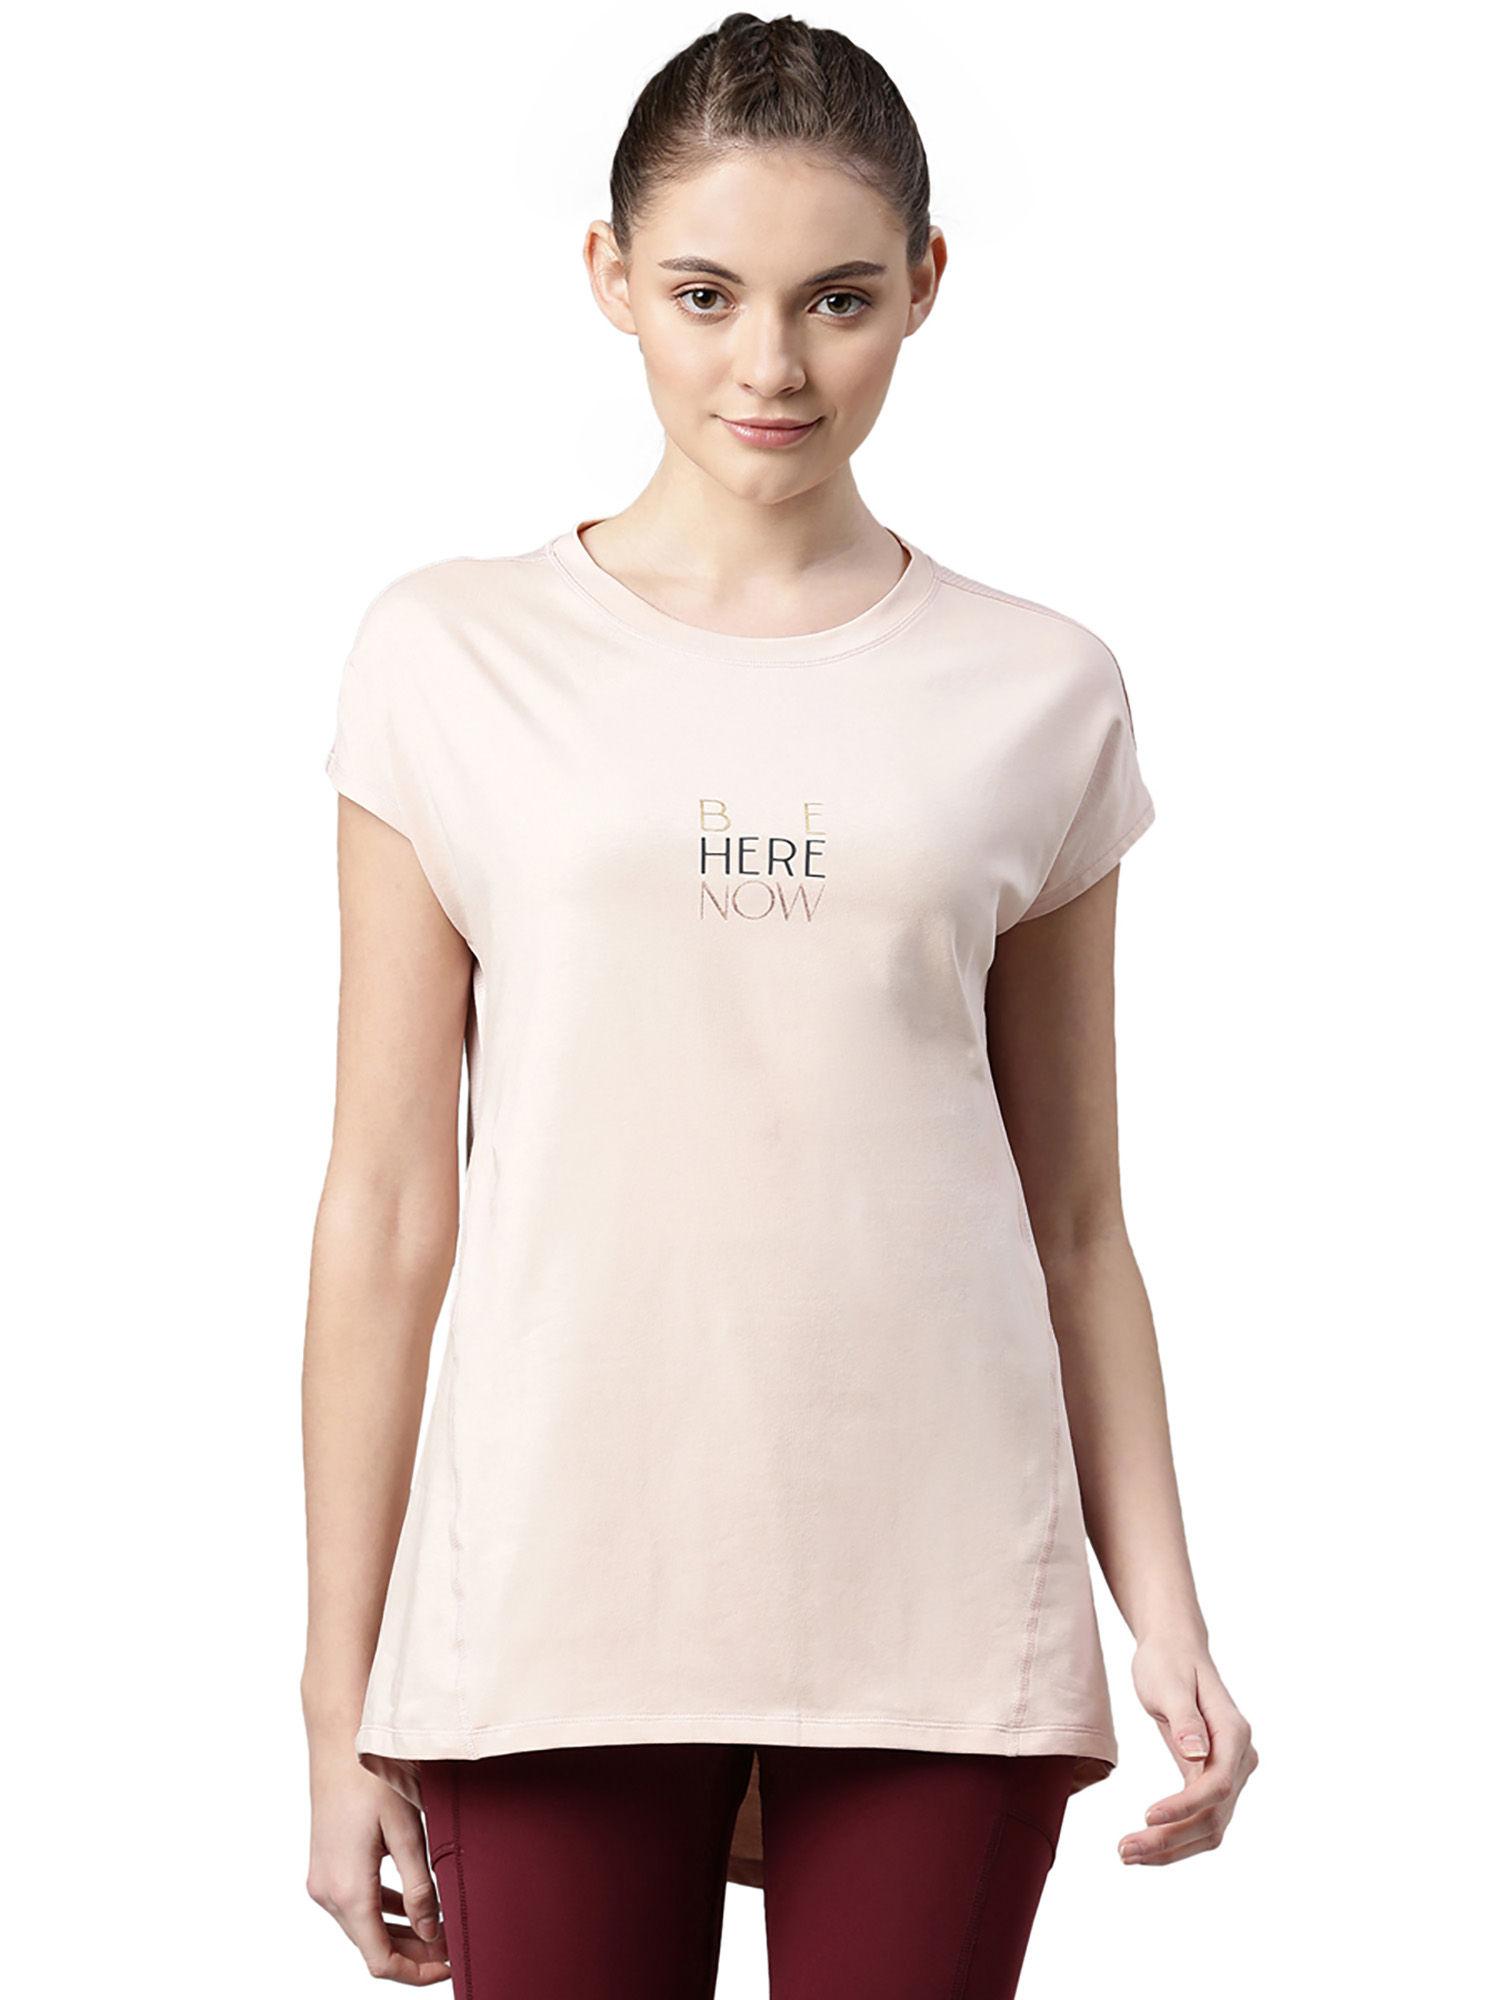 womens a305-cotton spandex antimicrobial finish active stay fresh t-shirt-rose water